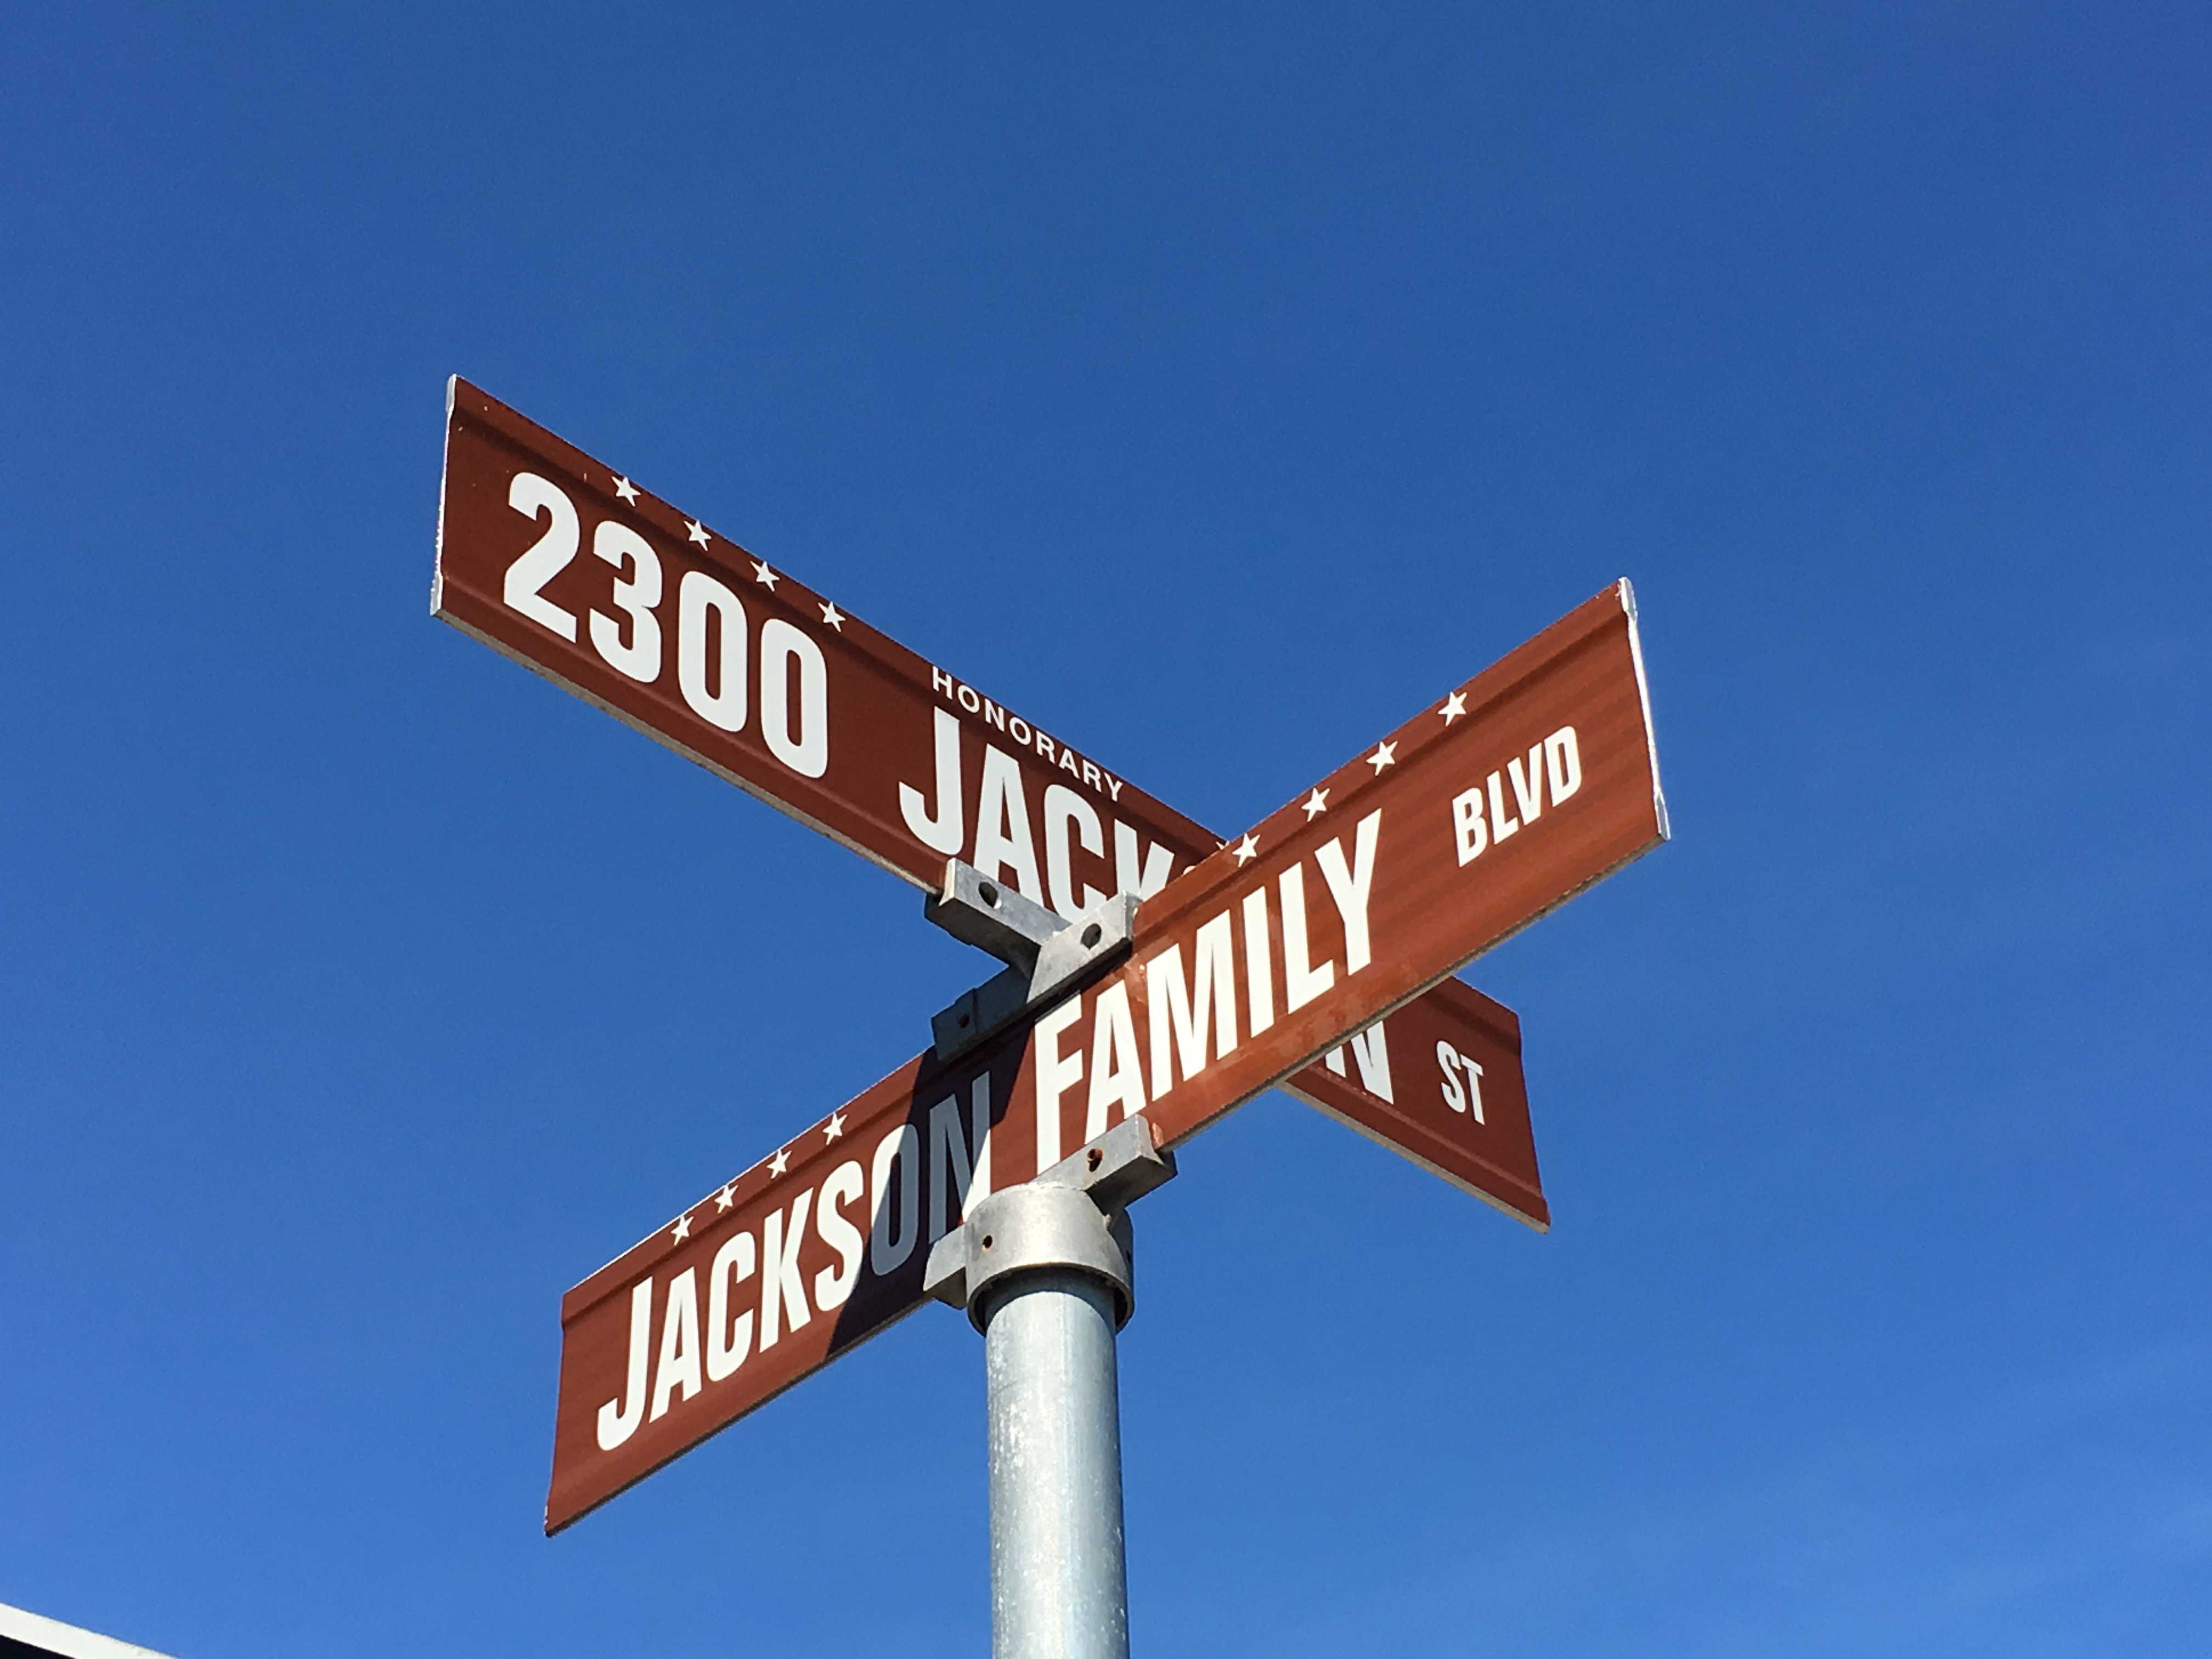 Jackson family street signs in Gary, Indiana